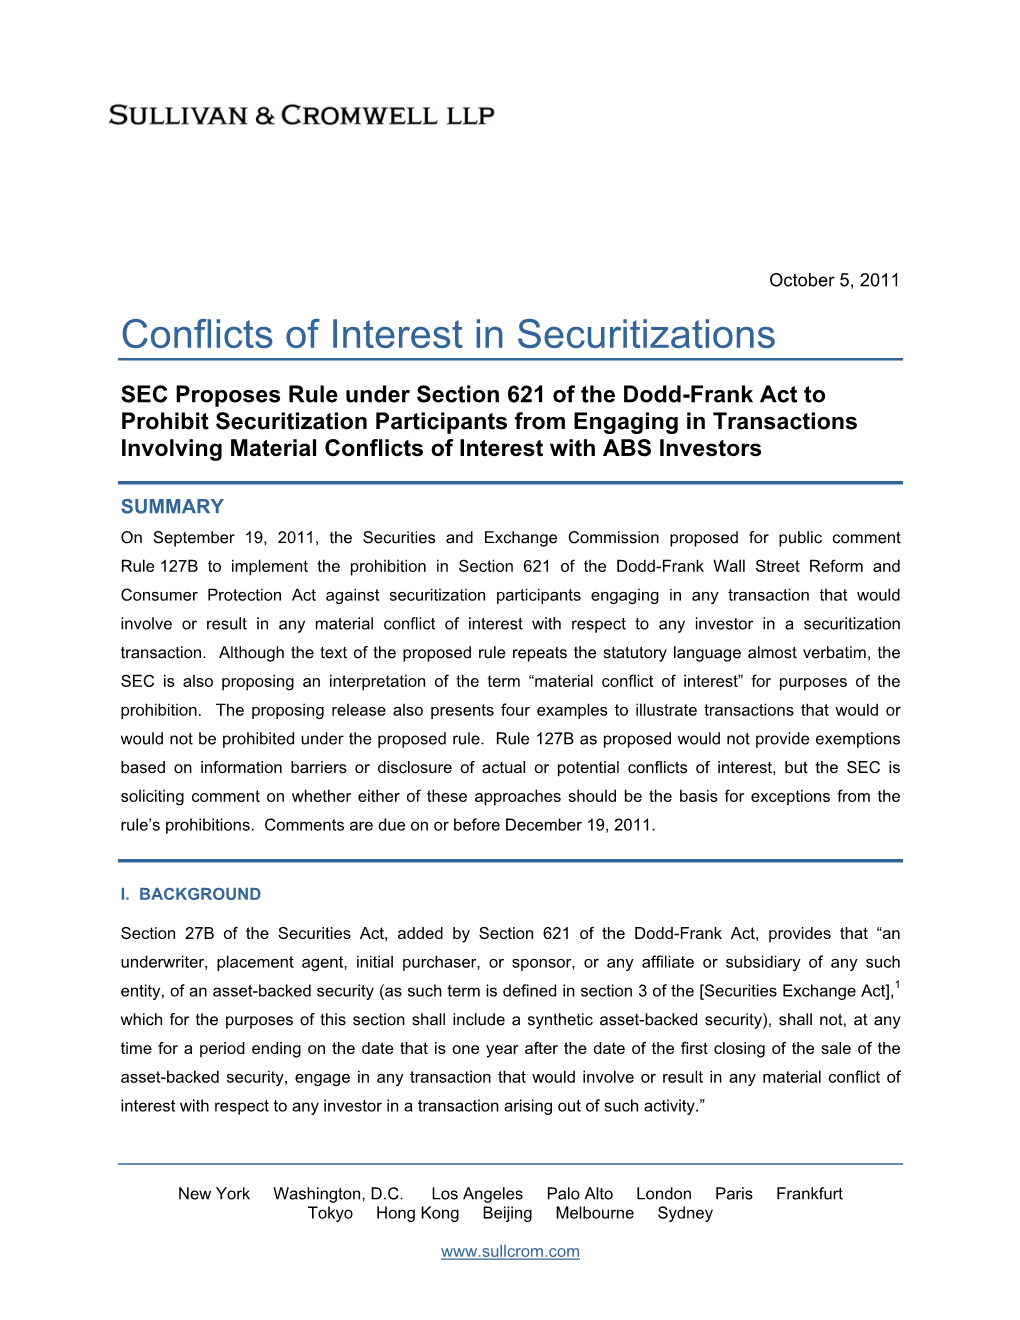 Conflicts of Interest in Securitizations